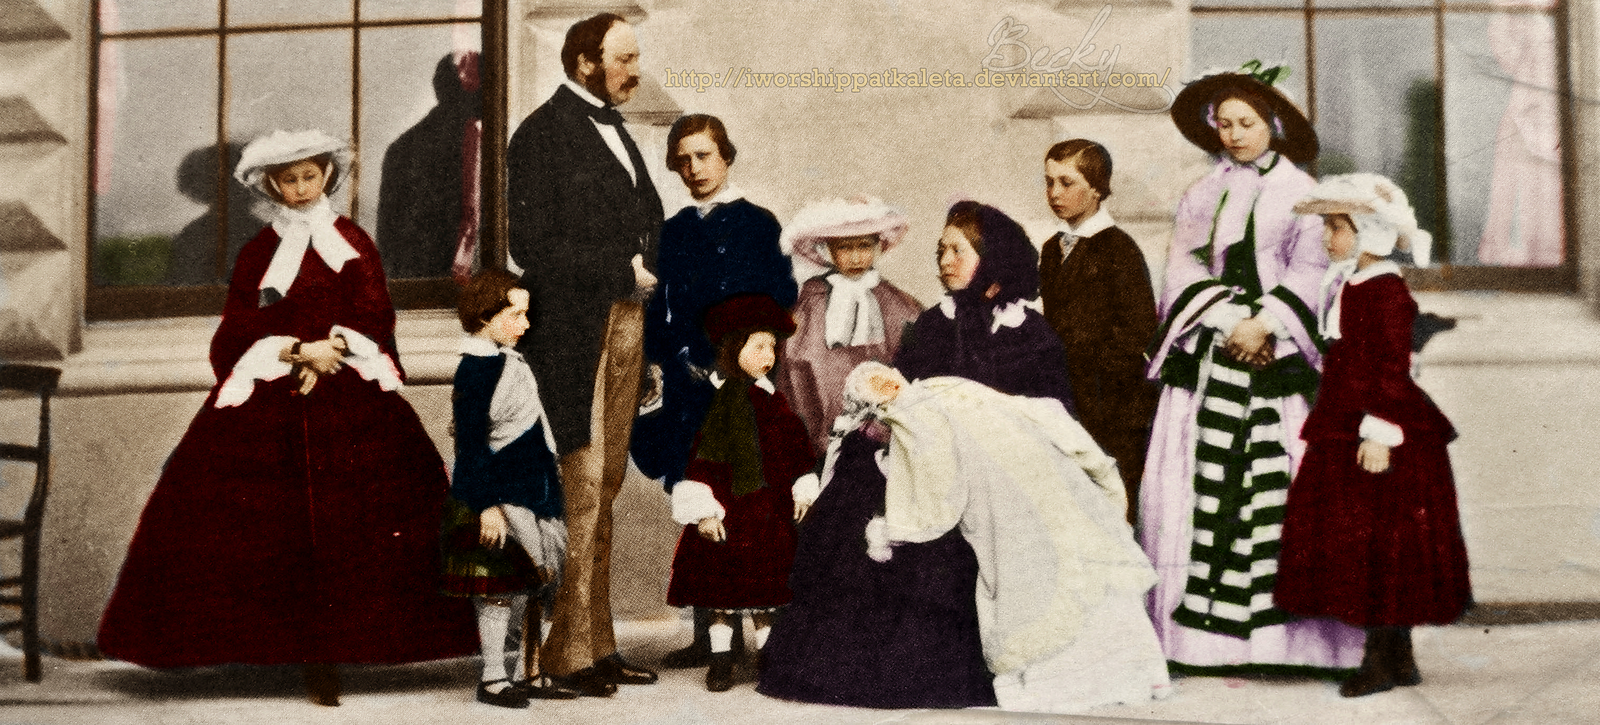 the family of queen victoria by iworshippatkaleta-.png